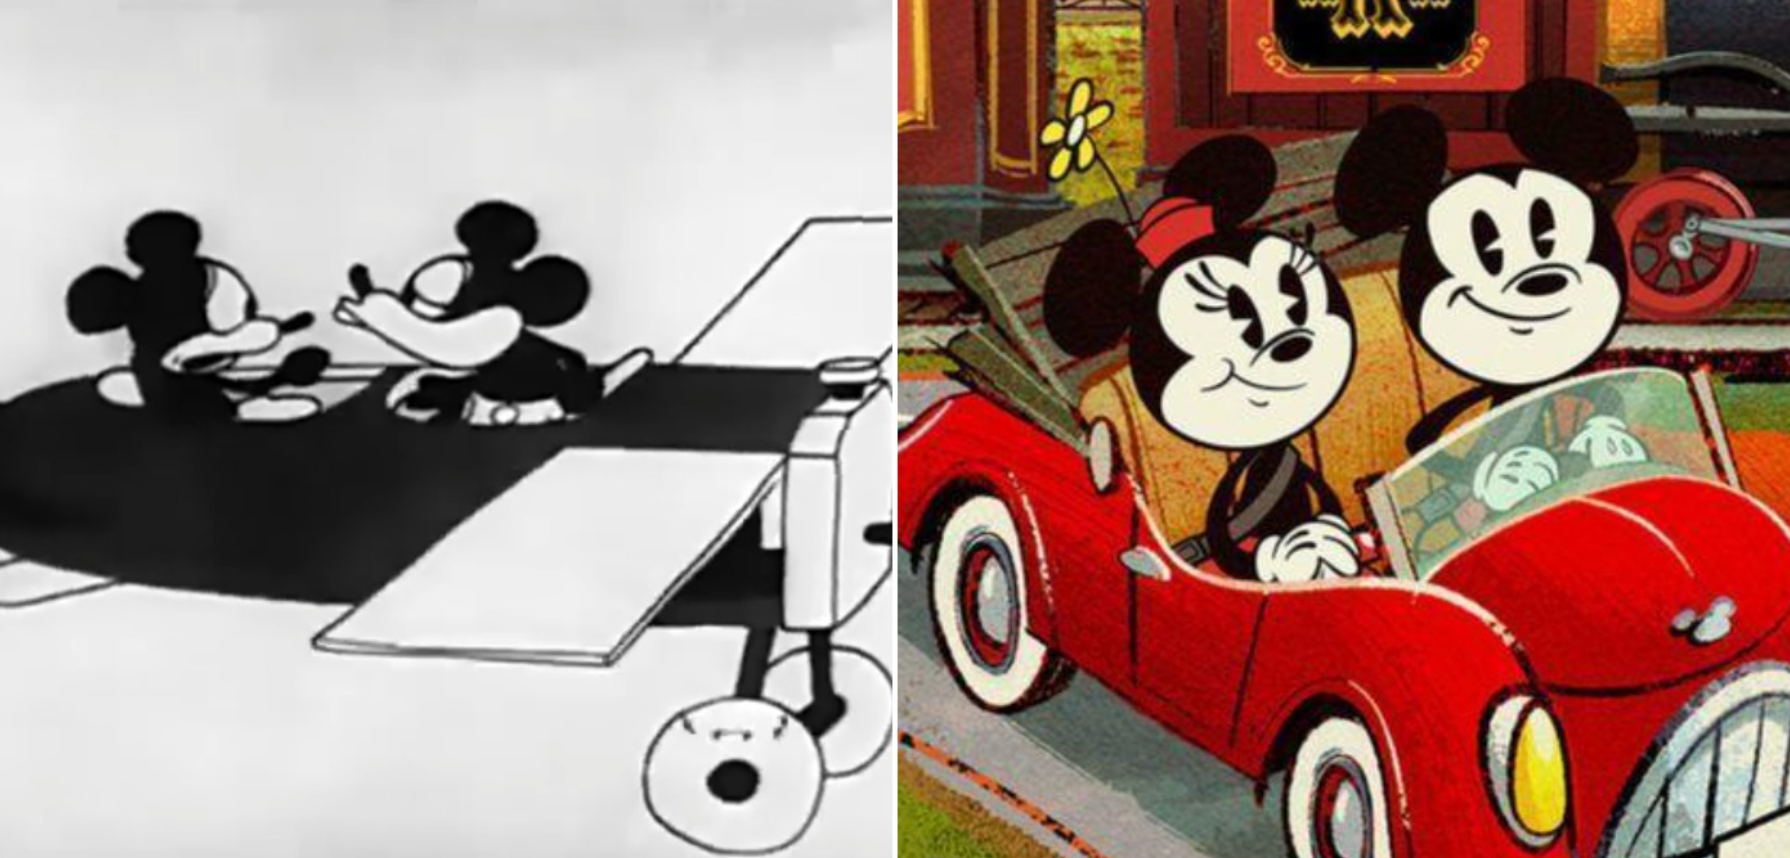 Disney mickey and minnie relationship comparison